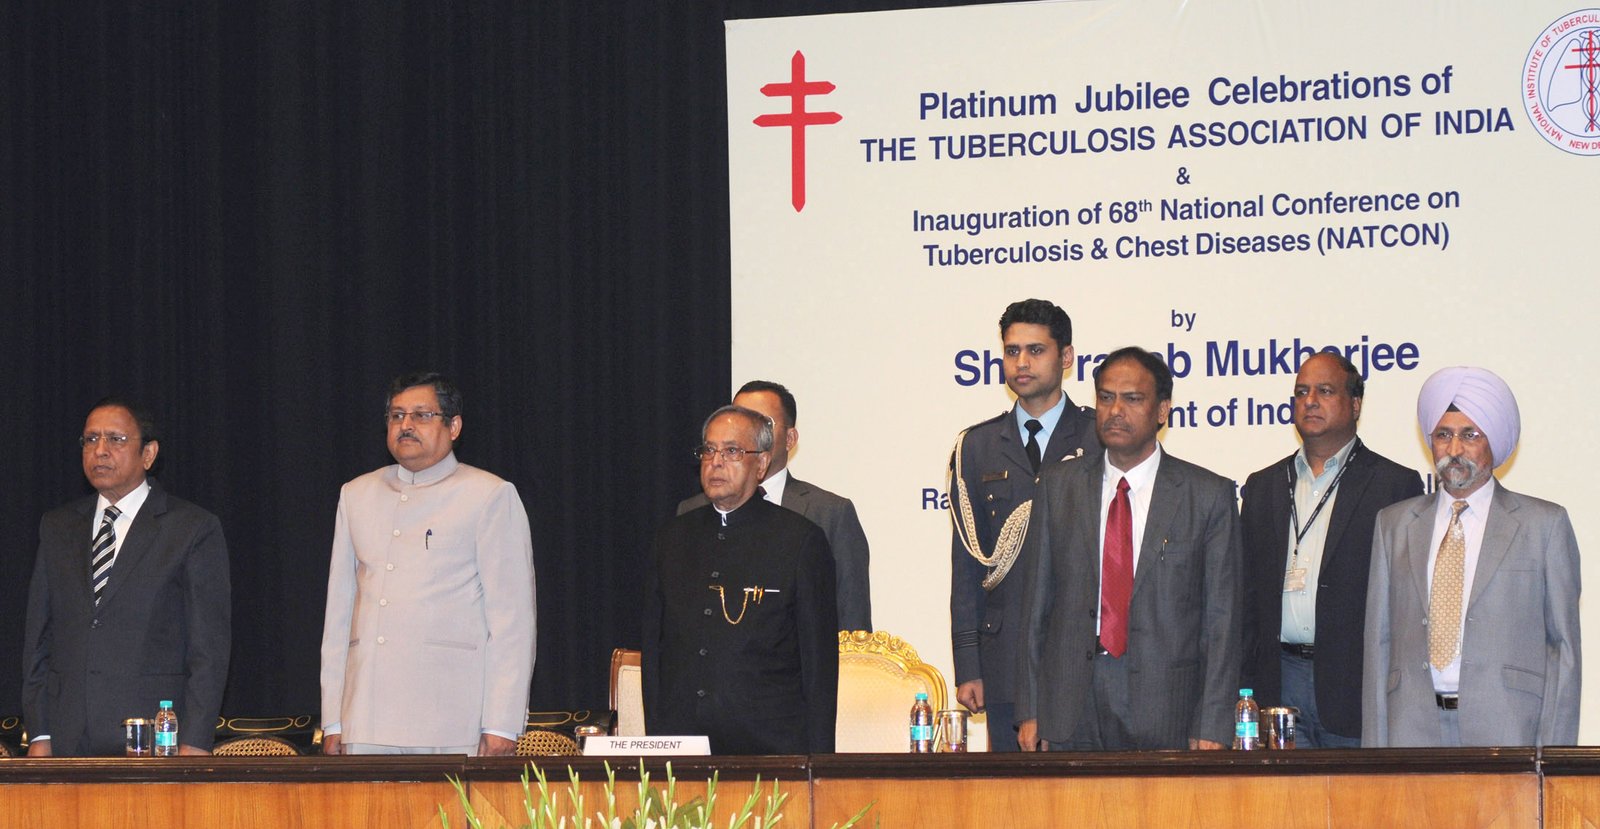 The President, Pranab Mukherjee at the inauguration of the 68th National Conference on TB and Allied Diseases (NATCON), organised to commemorate the Platinum Jubilee Celebrations of the Tuberculosis Association of India (TAI), at Rashtrapati Bhavan, in Ne